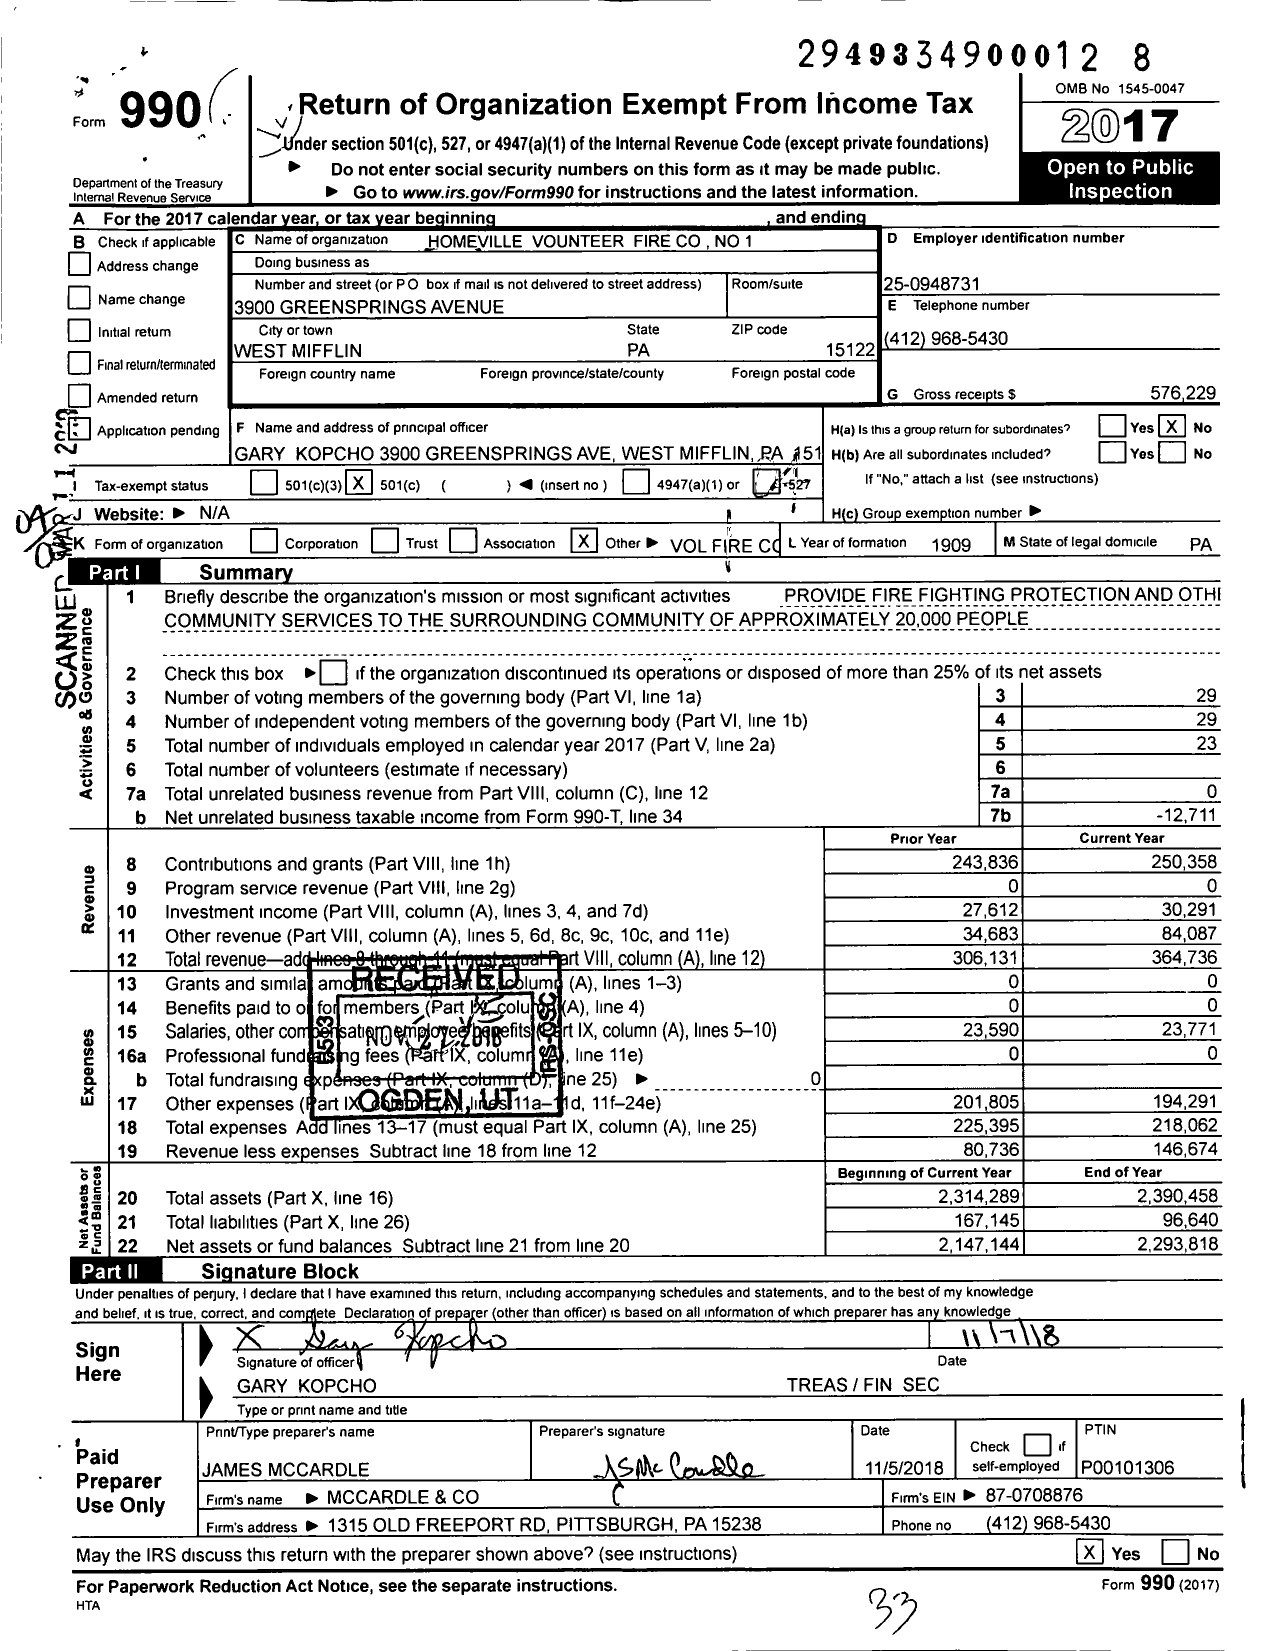 Image of first page of 2017 Form 990O for HOMEVILLE Volunteer FIRE #1